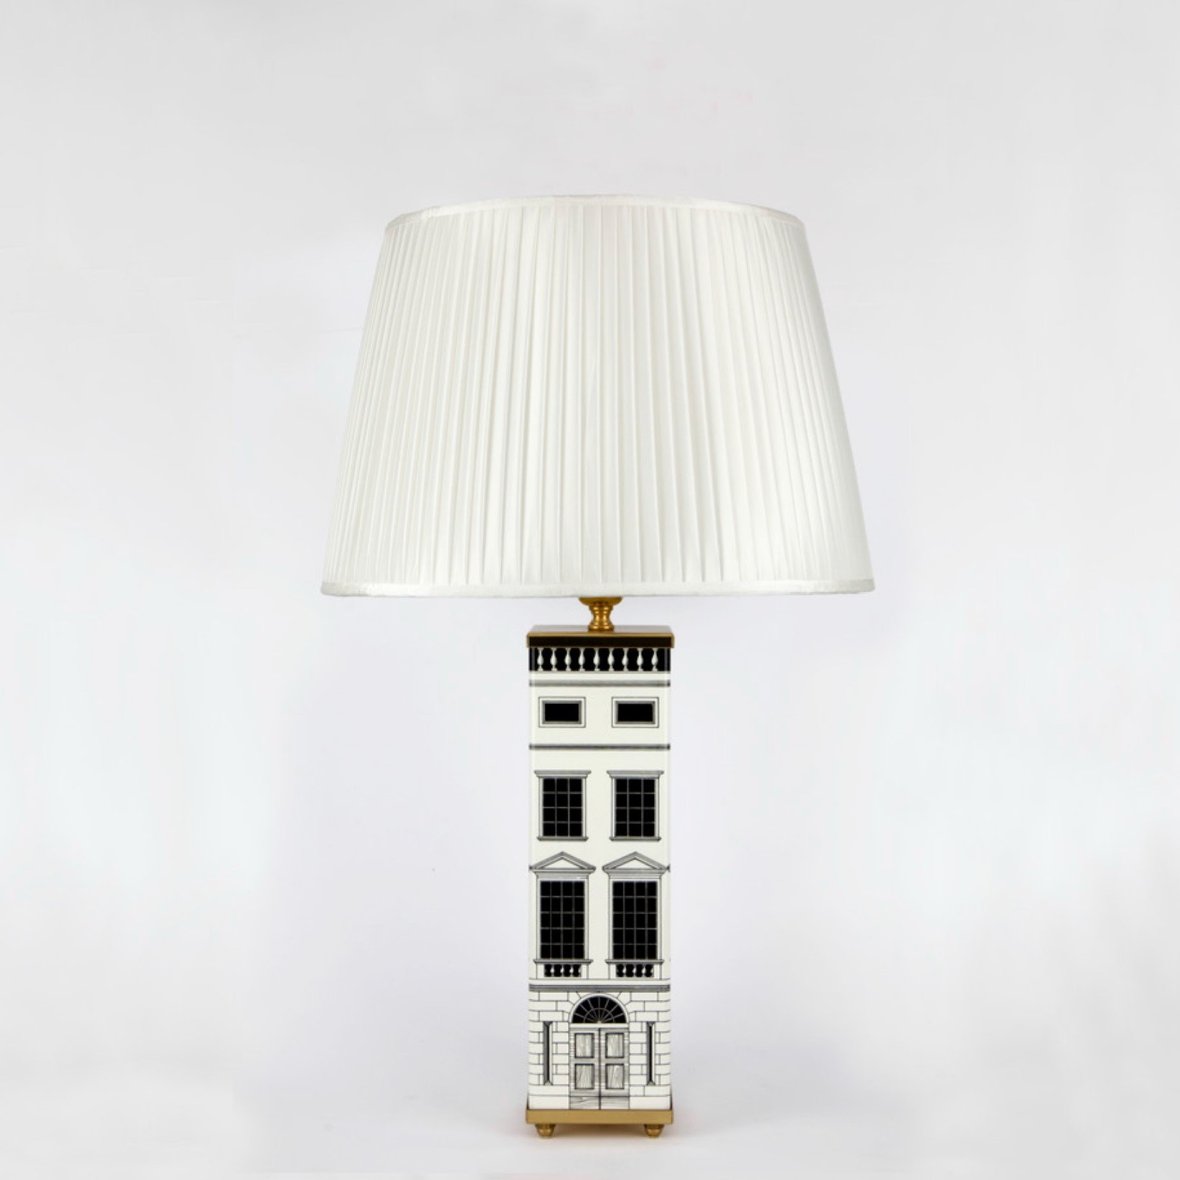 conical-pleated-lampshade-white-2